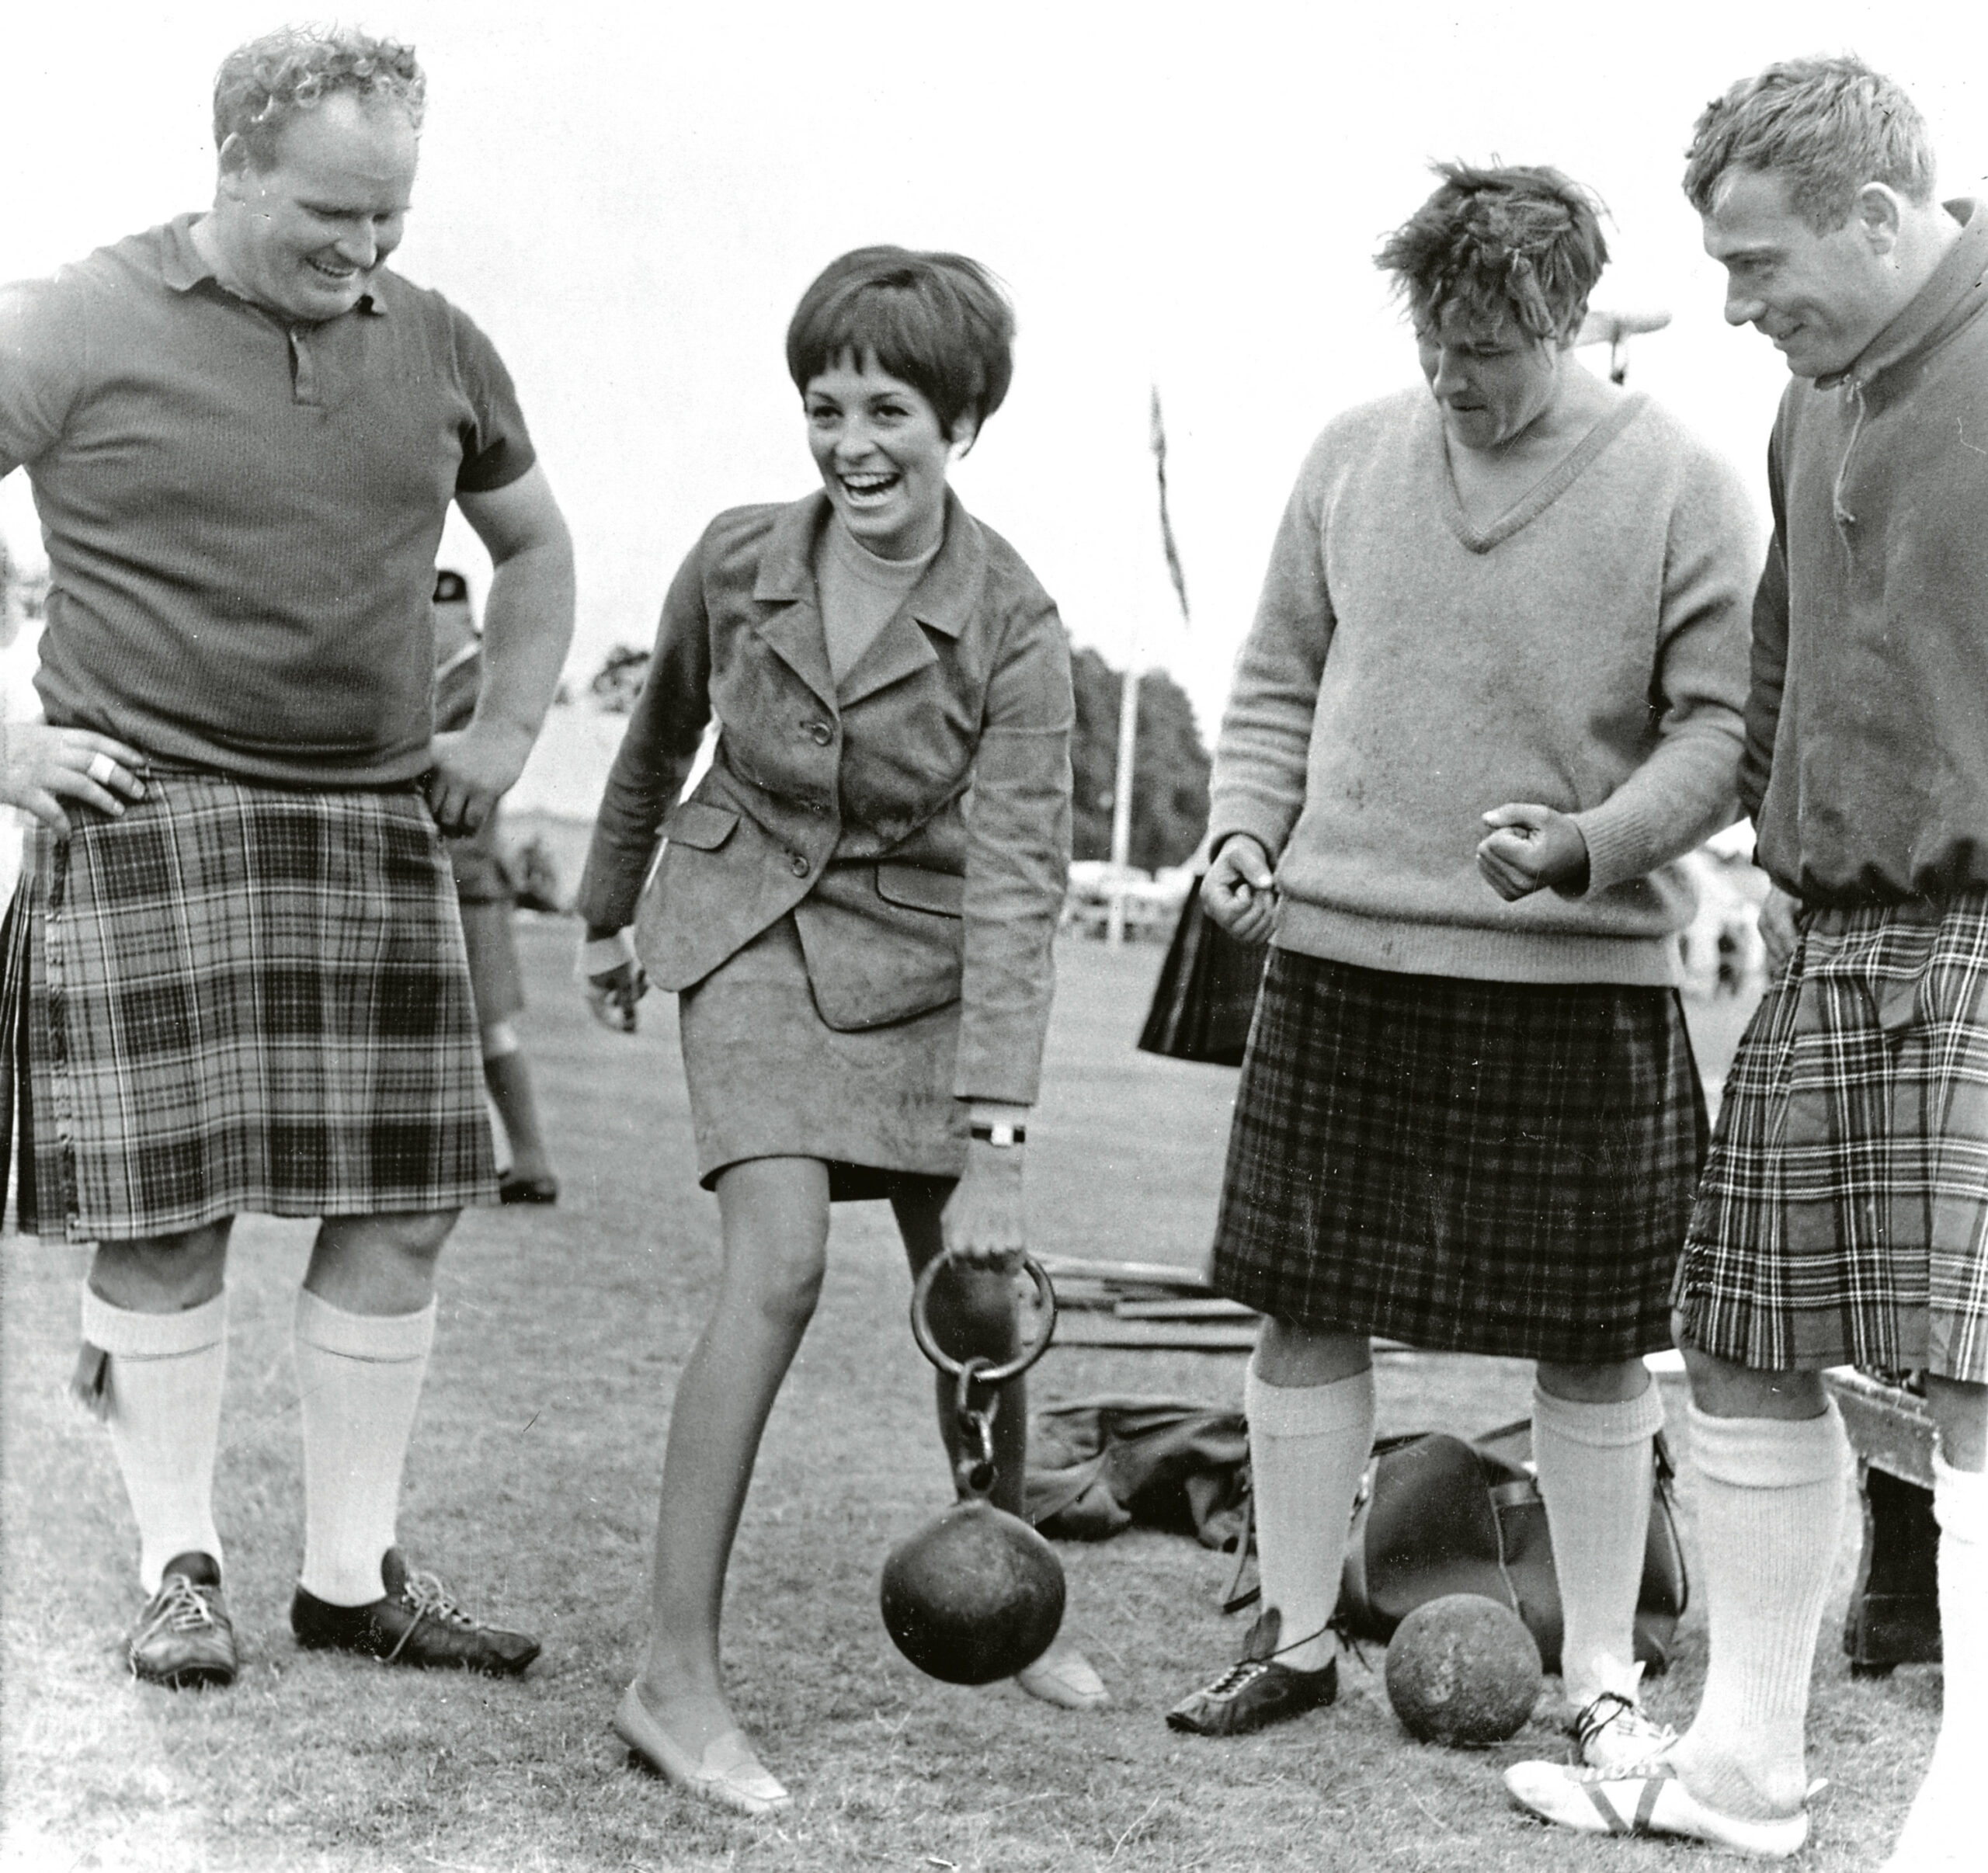 Miss Great Britain 1967 Jennifer Gurley tries to lift the 58lb weight, watched by Bill Anderson, Charlie Allan and Arthur Bowe.